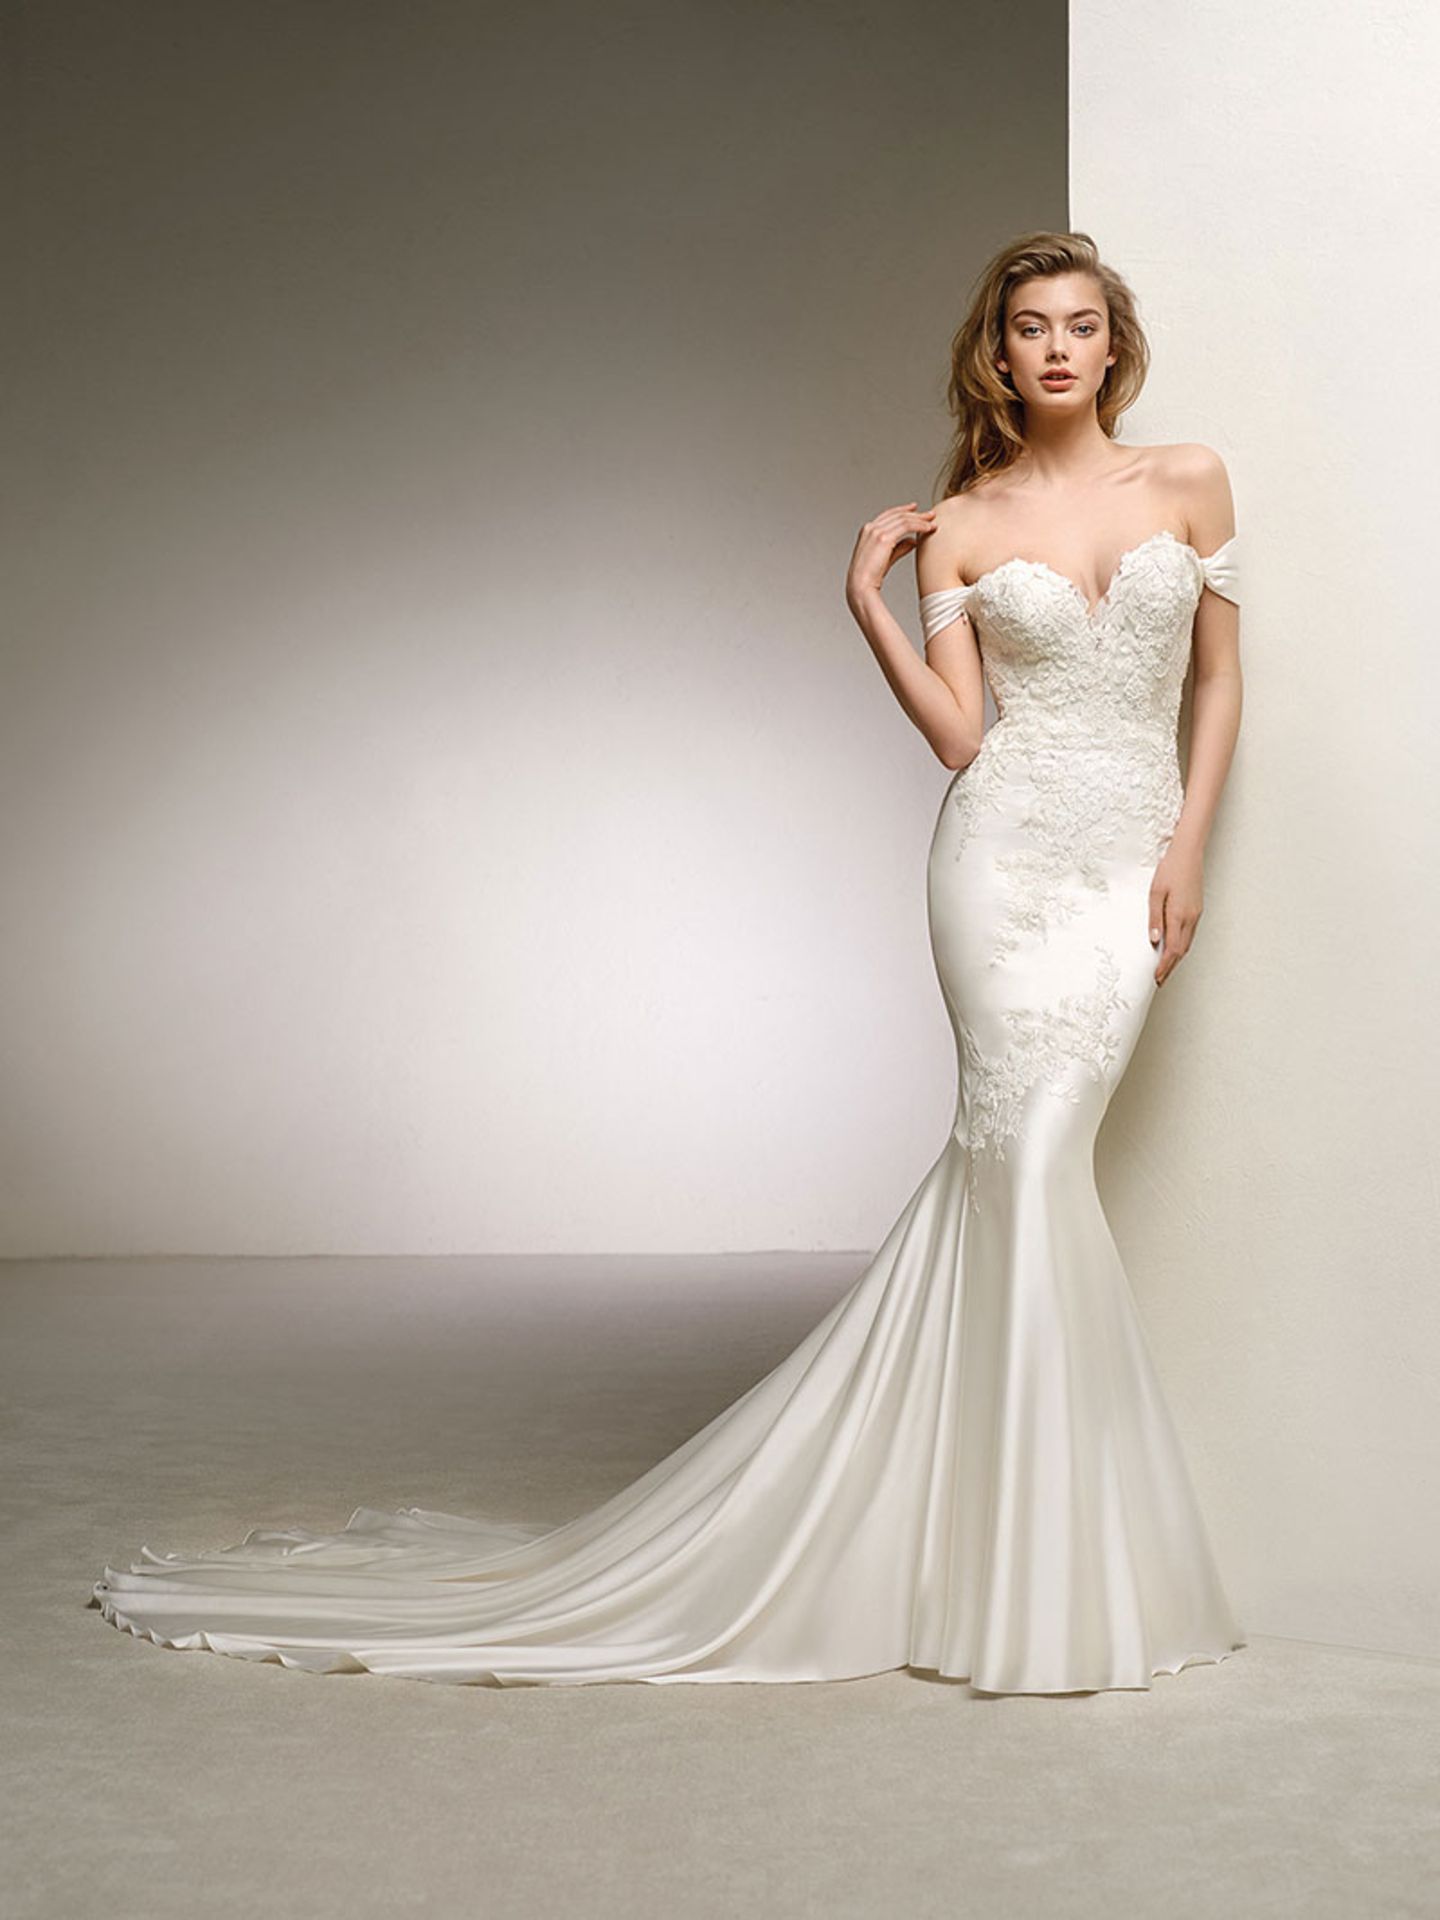 1 x Pronovious Dante Mermaid Bridal Gown With Floral Lace Highlights - Size UK 10 - RRP £1,640 - Image 8 of 13